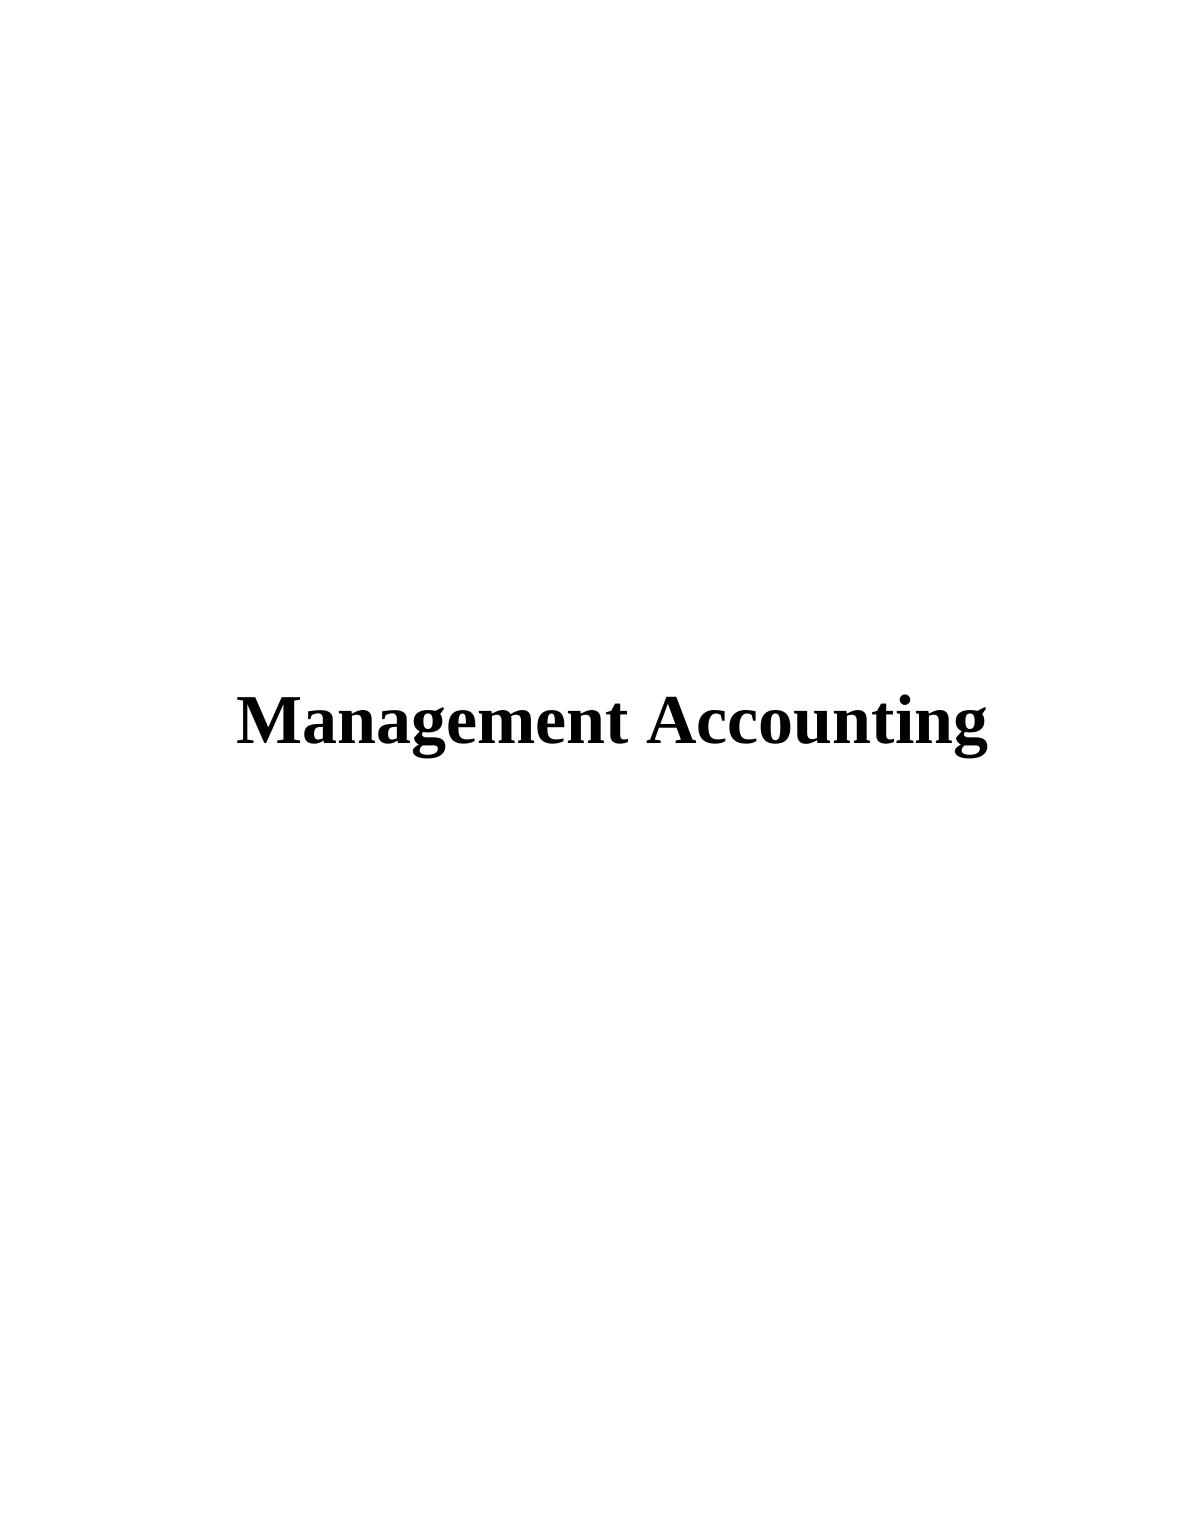 Research Report on Management Accounting_1